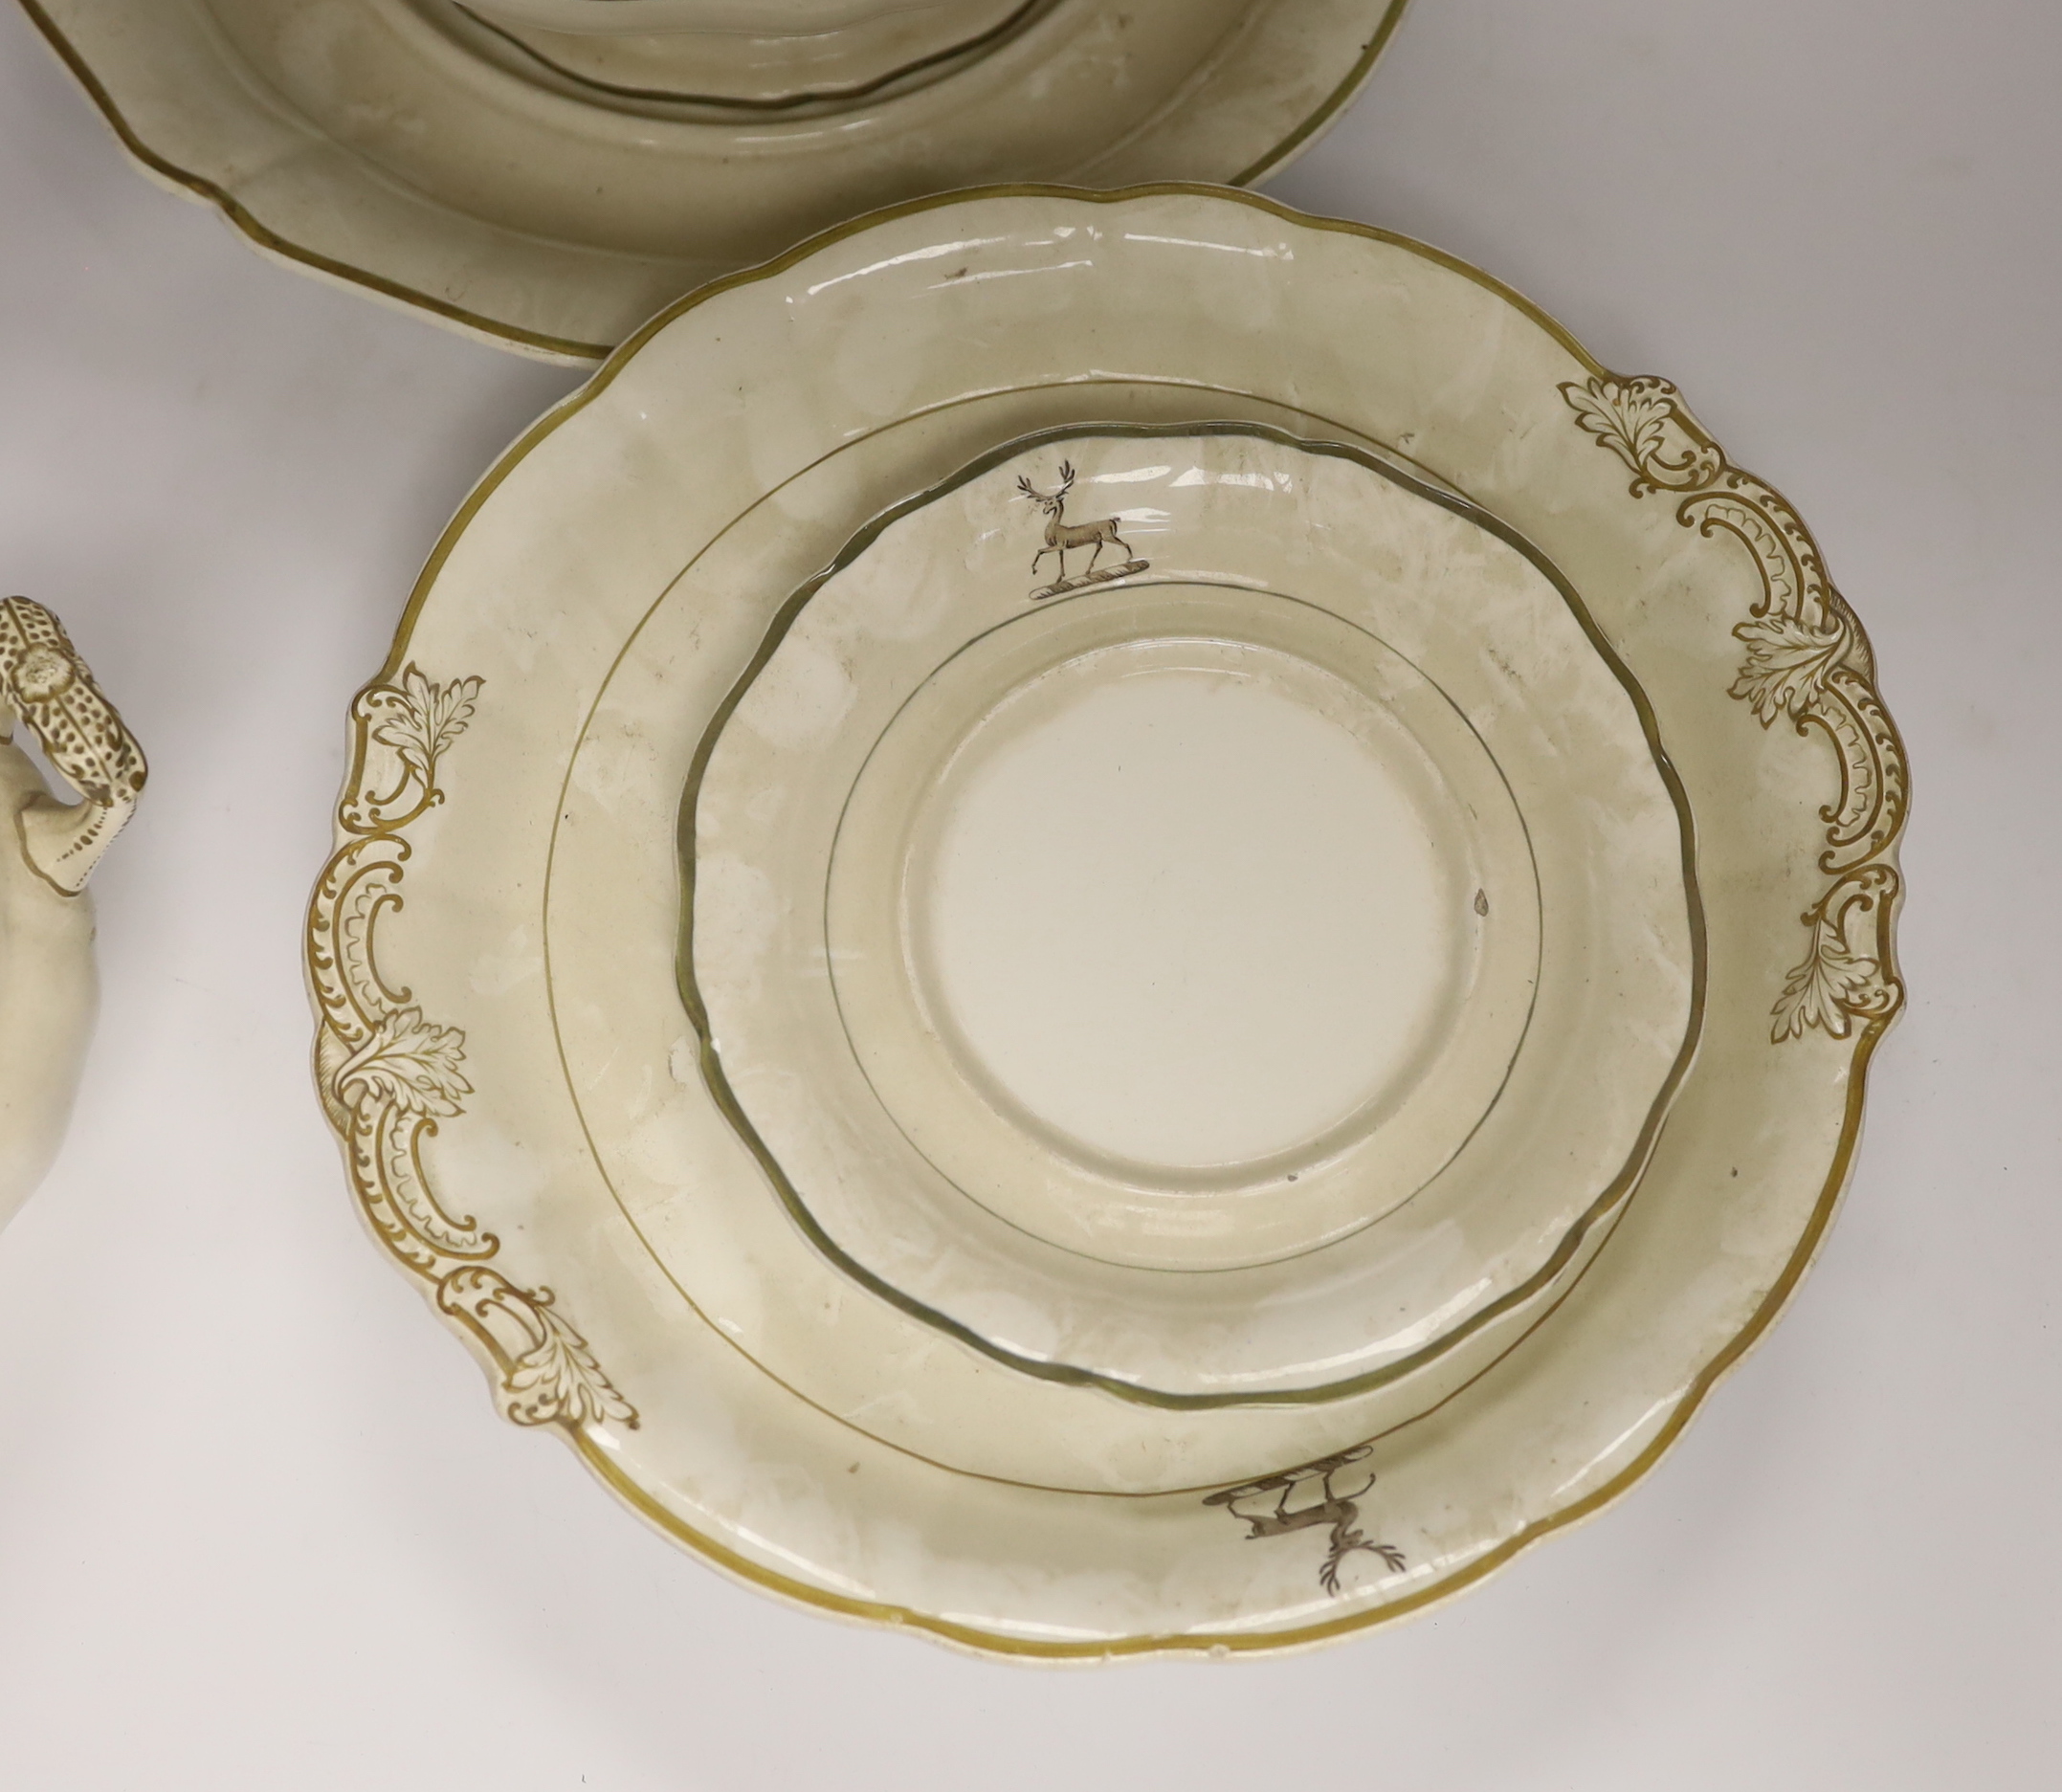 Copeland late Spode crested part dinner set comprising tureen and stand, bowl and stand and two - Image 4 of 5